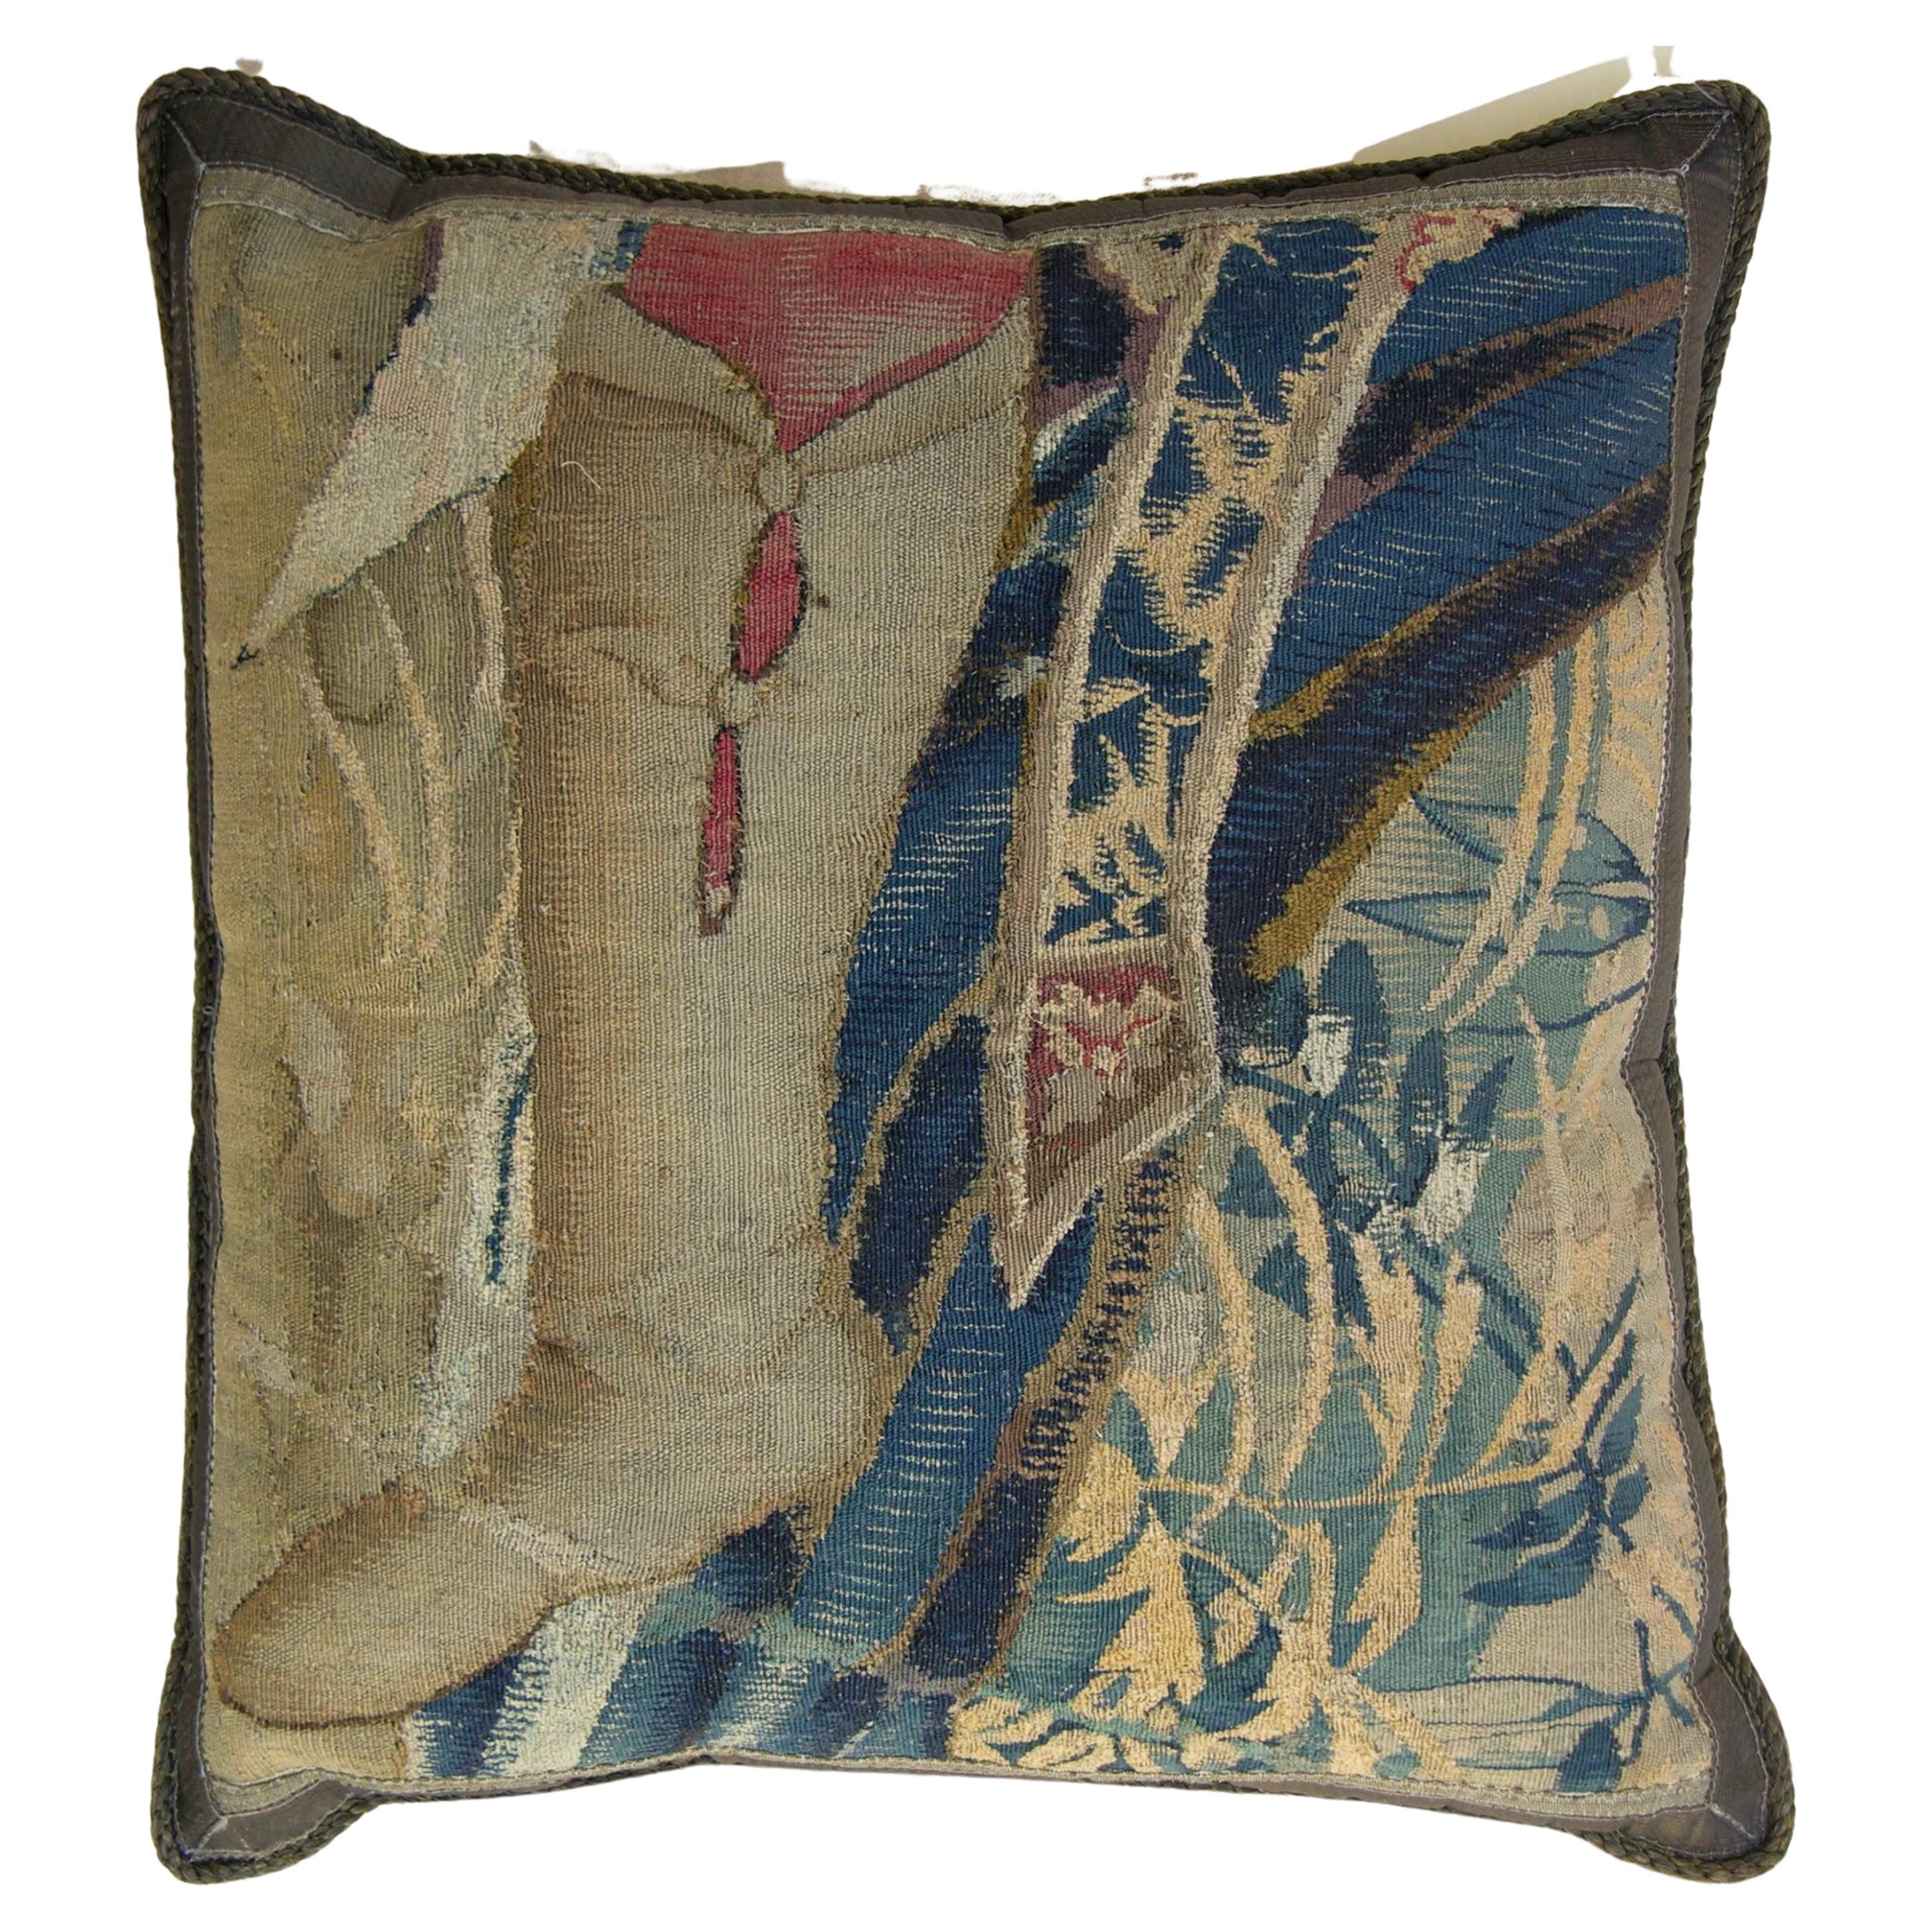 Antique Empire Brussels Tapestry Pillow - 22'' X 22'' For Sale